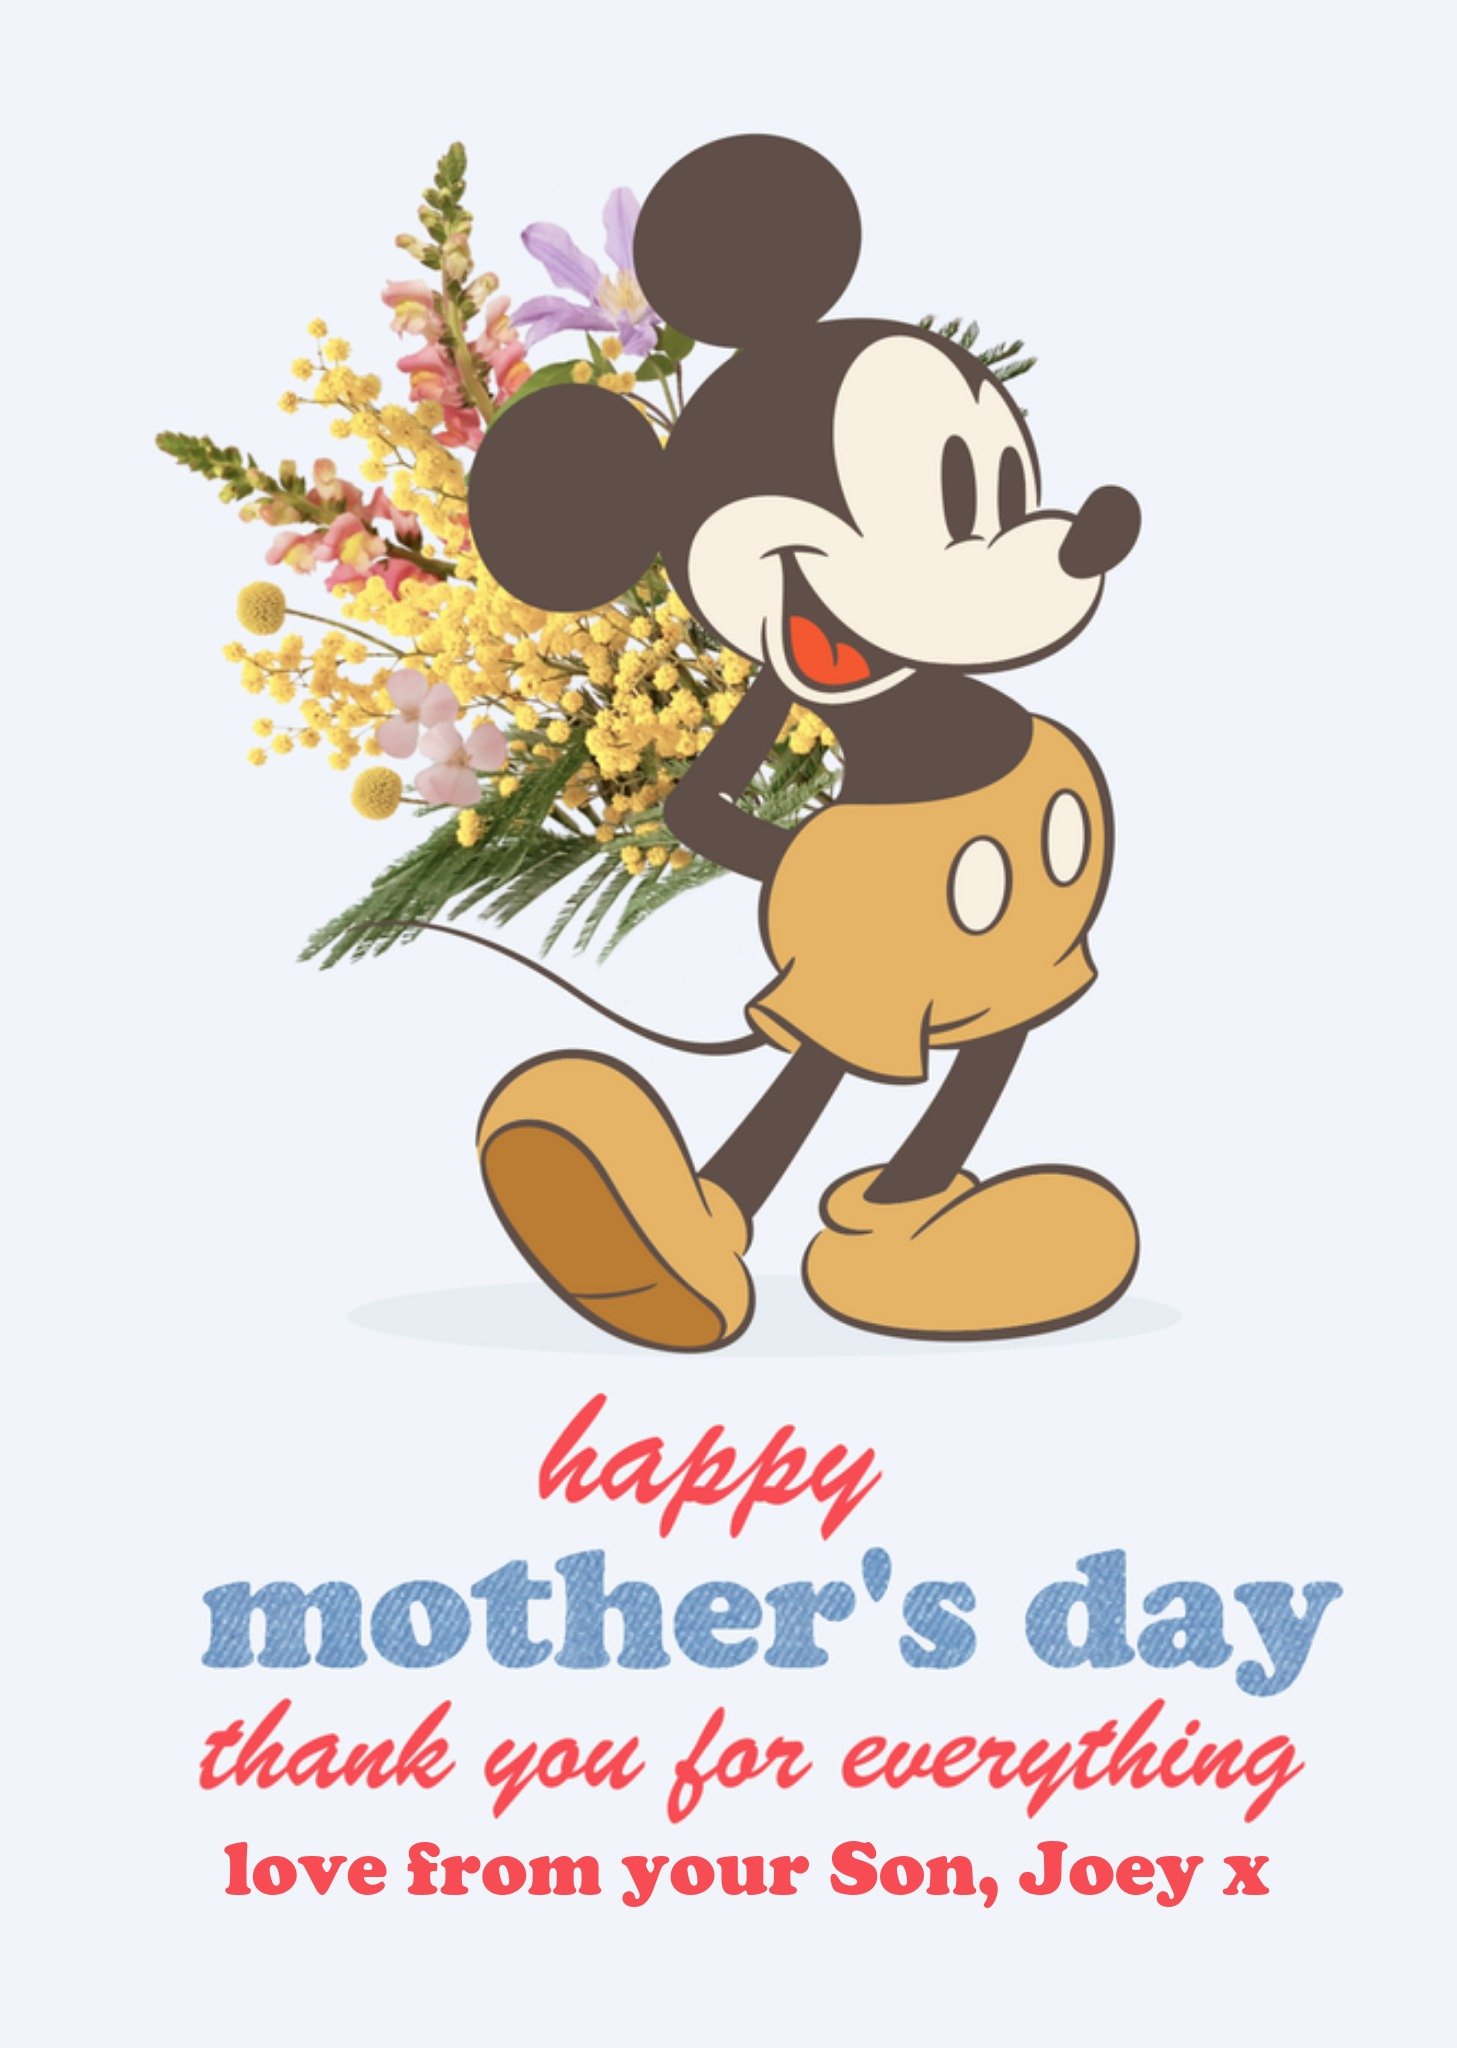 Disney Mickey Mouse Happy Mothers Day Thank You For Everything Card Ecard